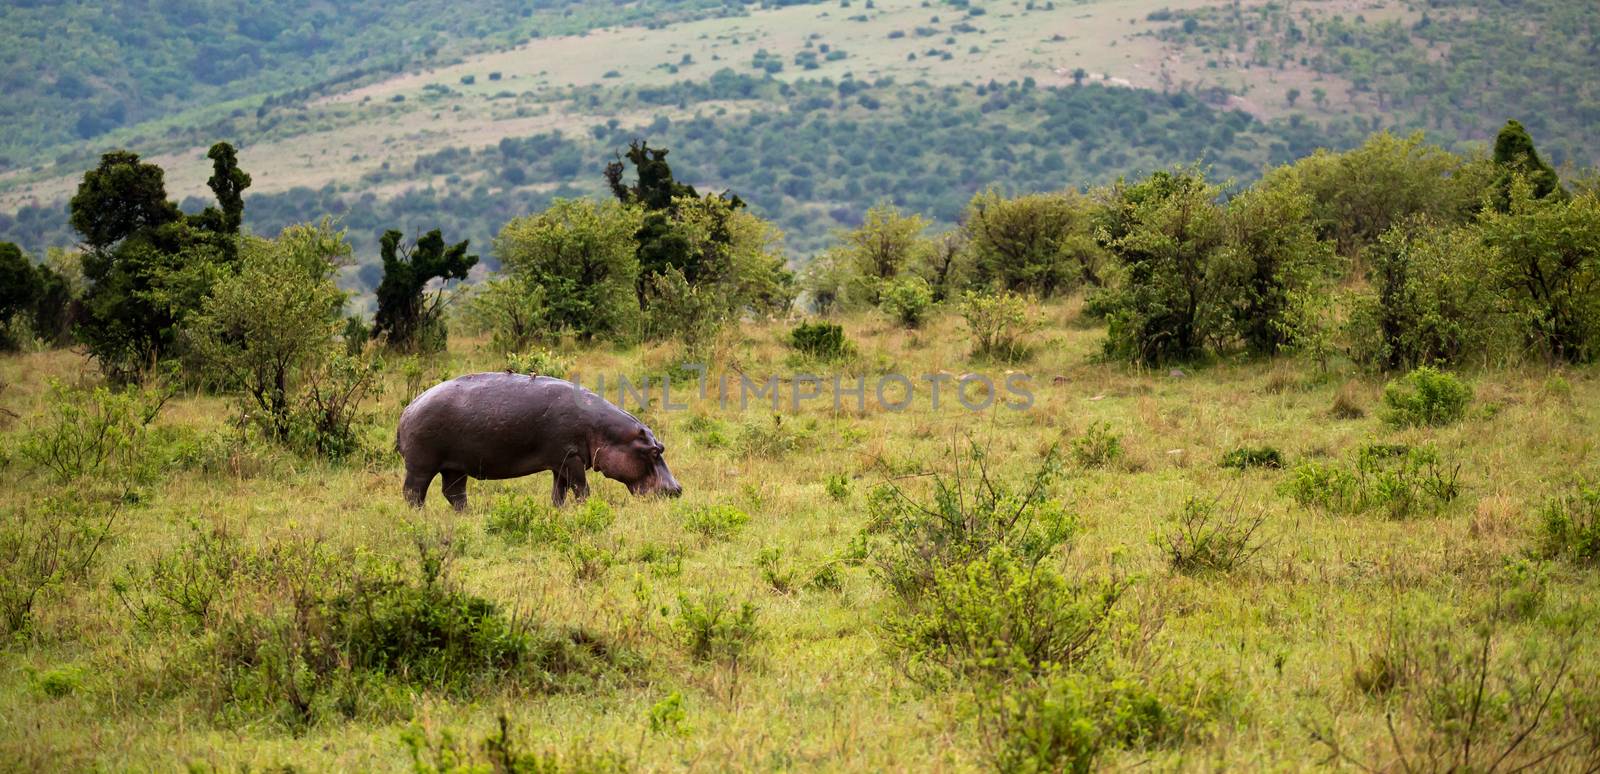 The hippo is walking in the savannah